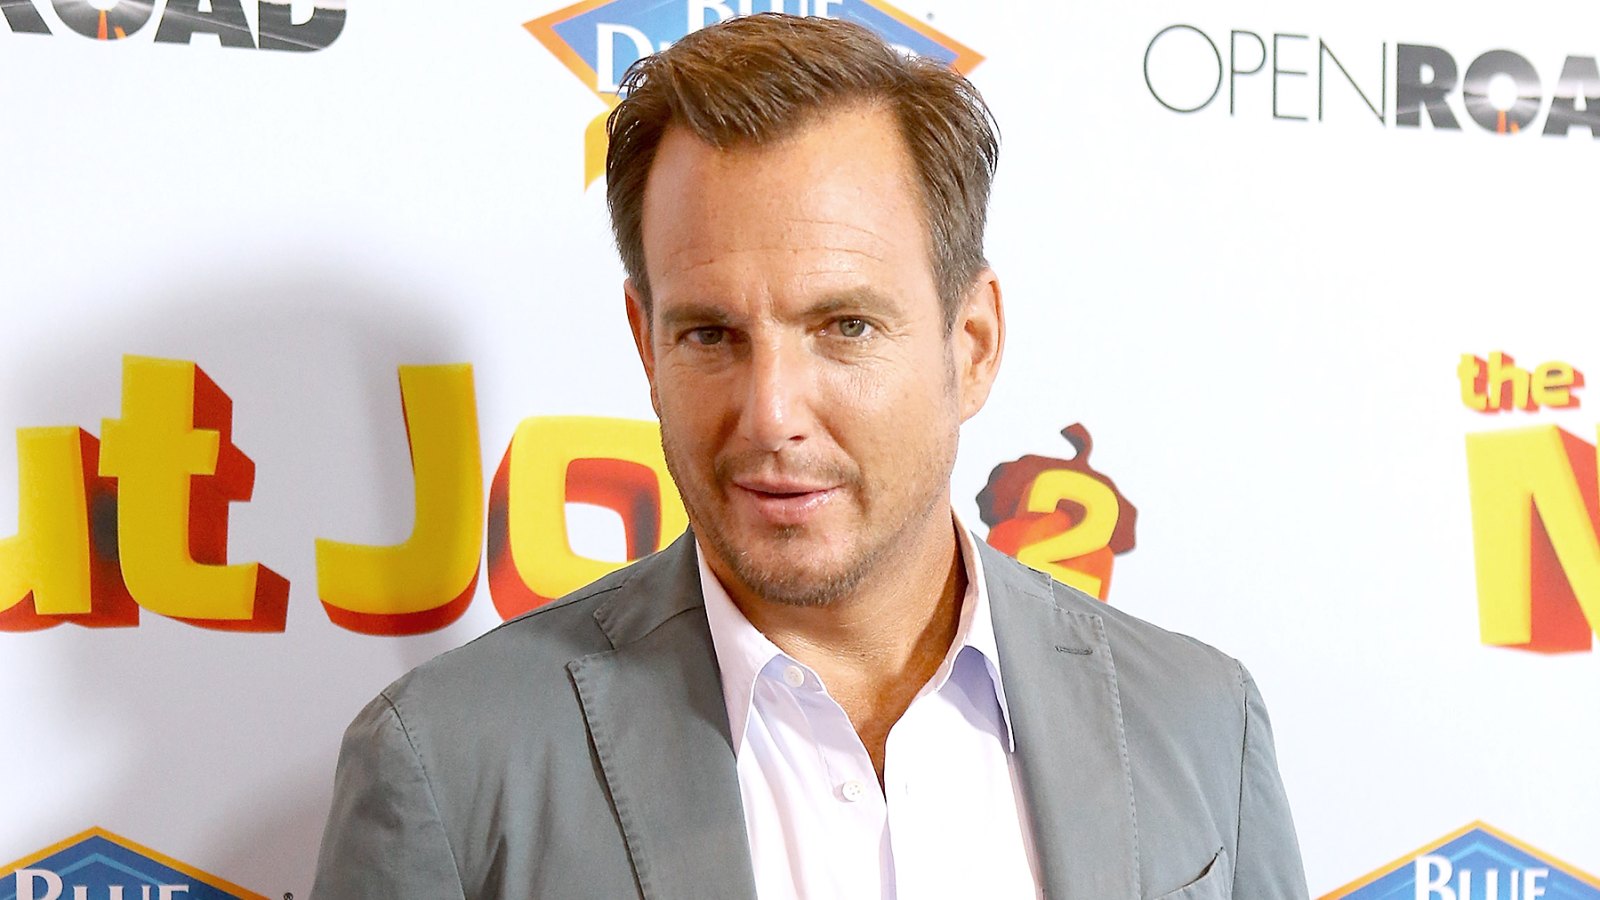 Will Arnett arrives to the Los Angeles premiere of "The Nut Job 2: Nutty By Nature" held at Regal Cinemas L.A. Live on August 5, 2017 in Los Angeles, California.